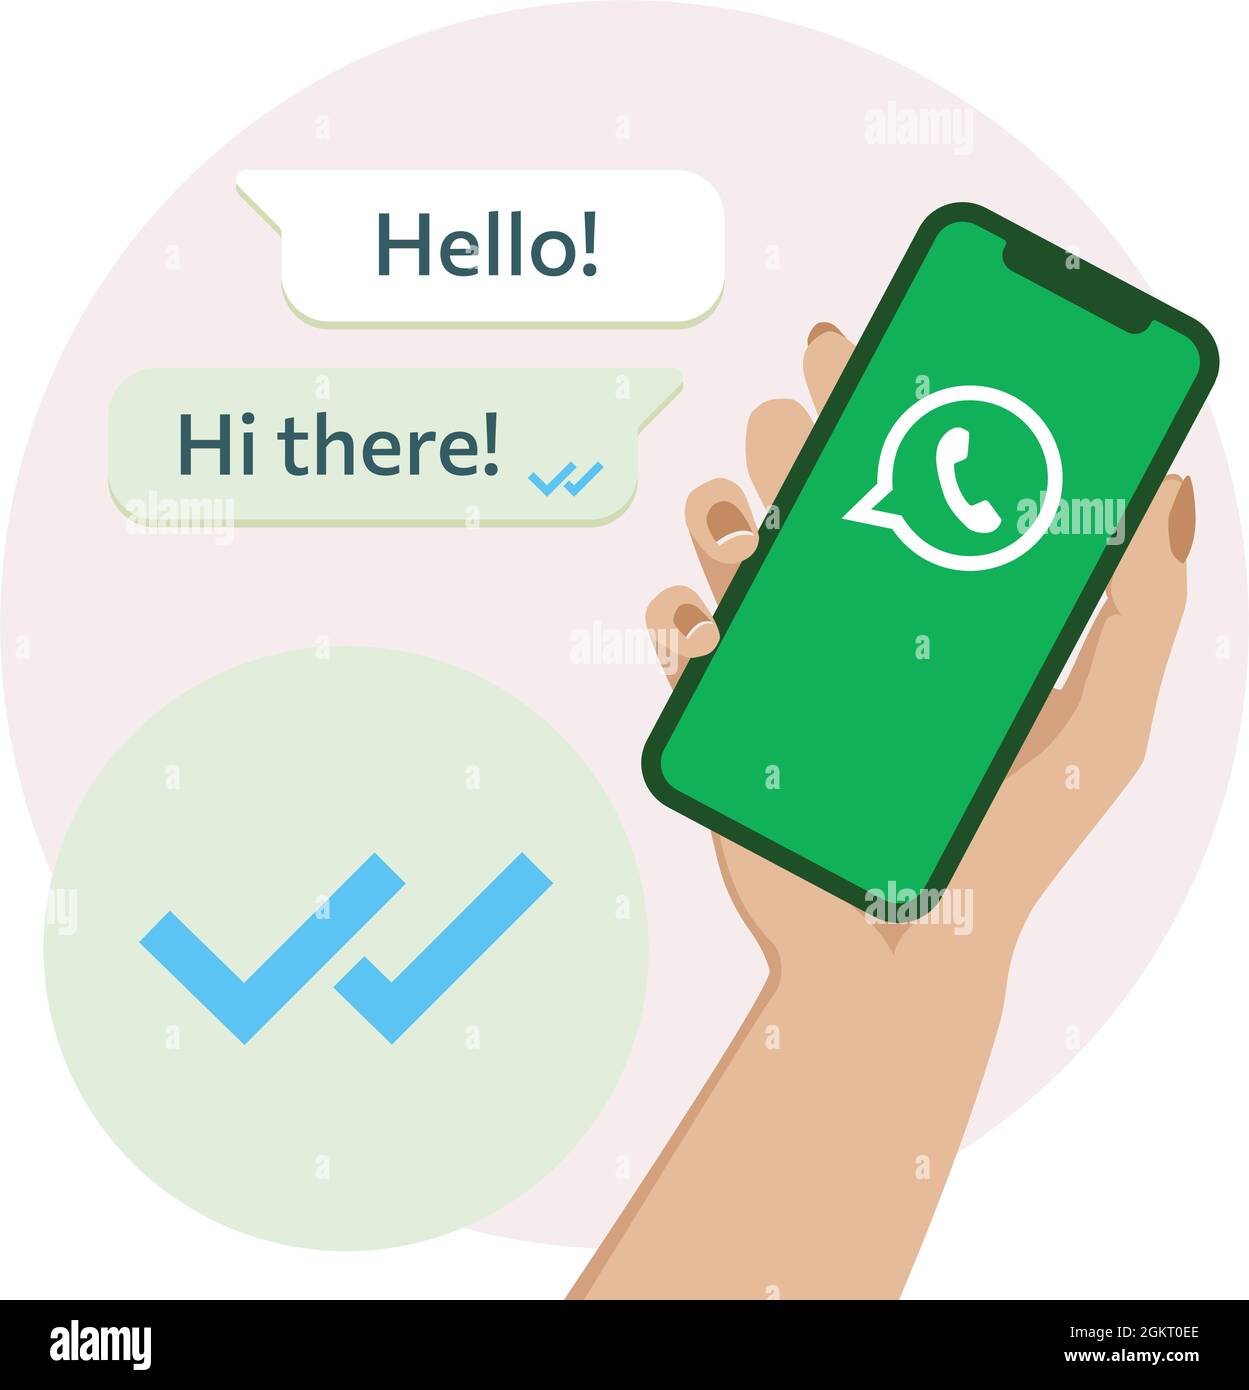 Hand of woman holding smartphones with Whatsapp chat screen. Double check concept. Vector illustration. Flat colors. Stock Vector